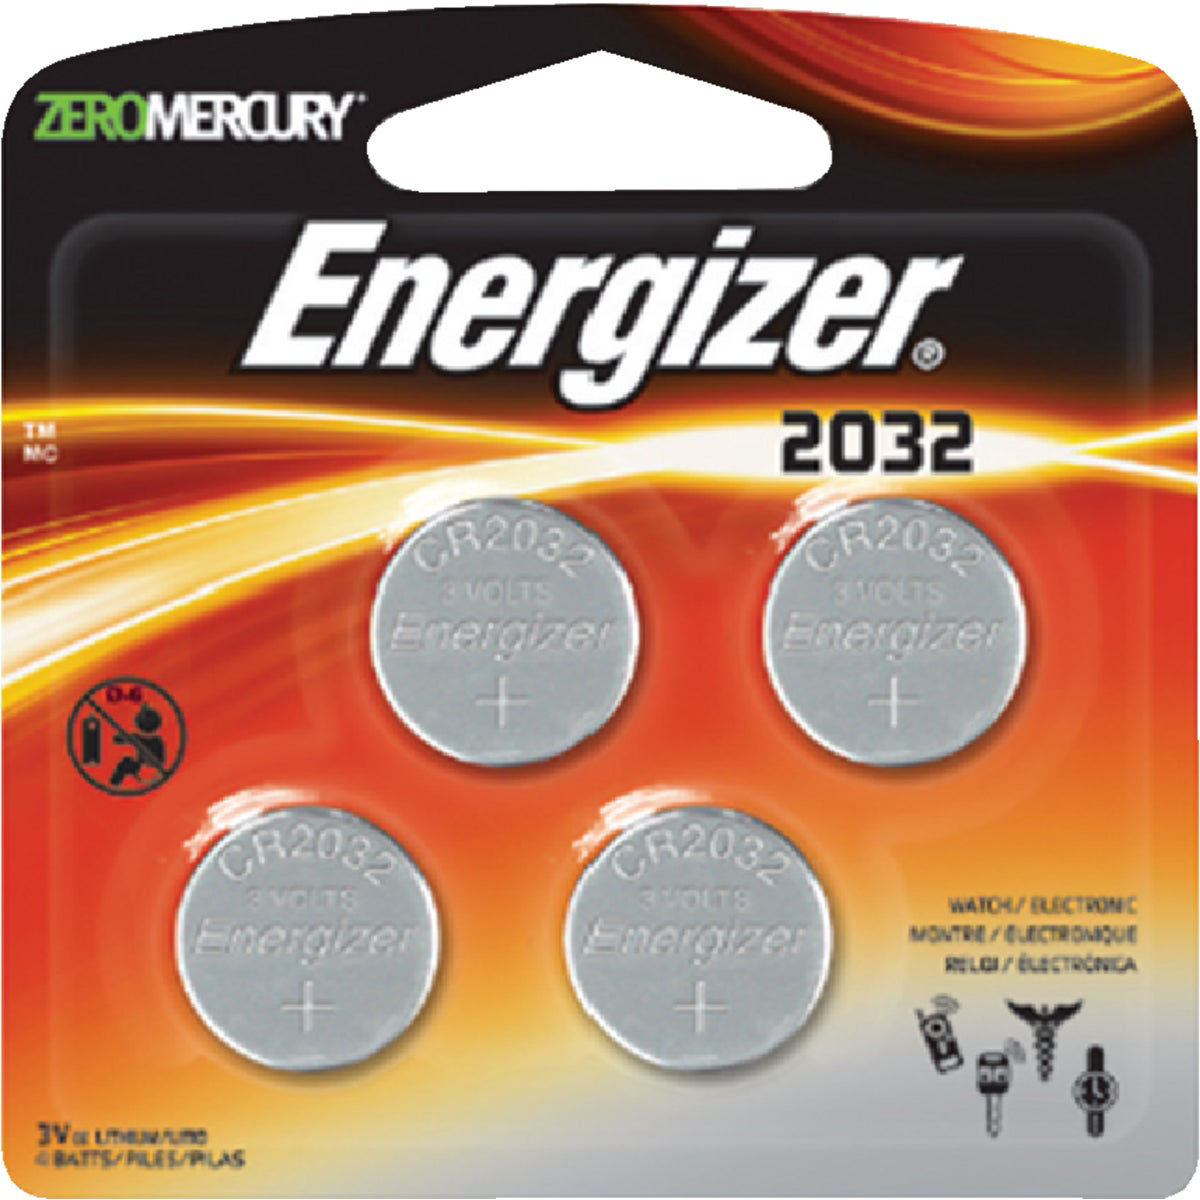 Duracell 2032 3V Lithium Battery 4-Pack - For Security Device